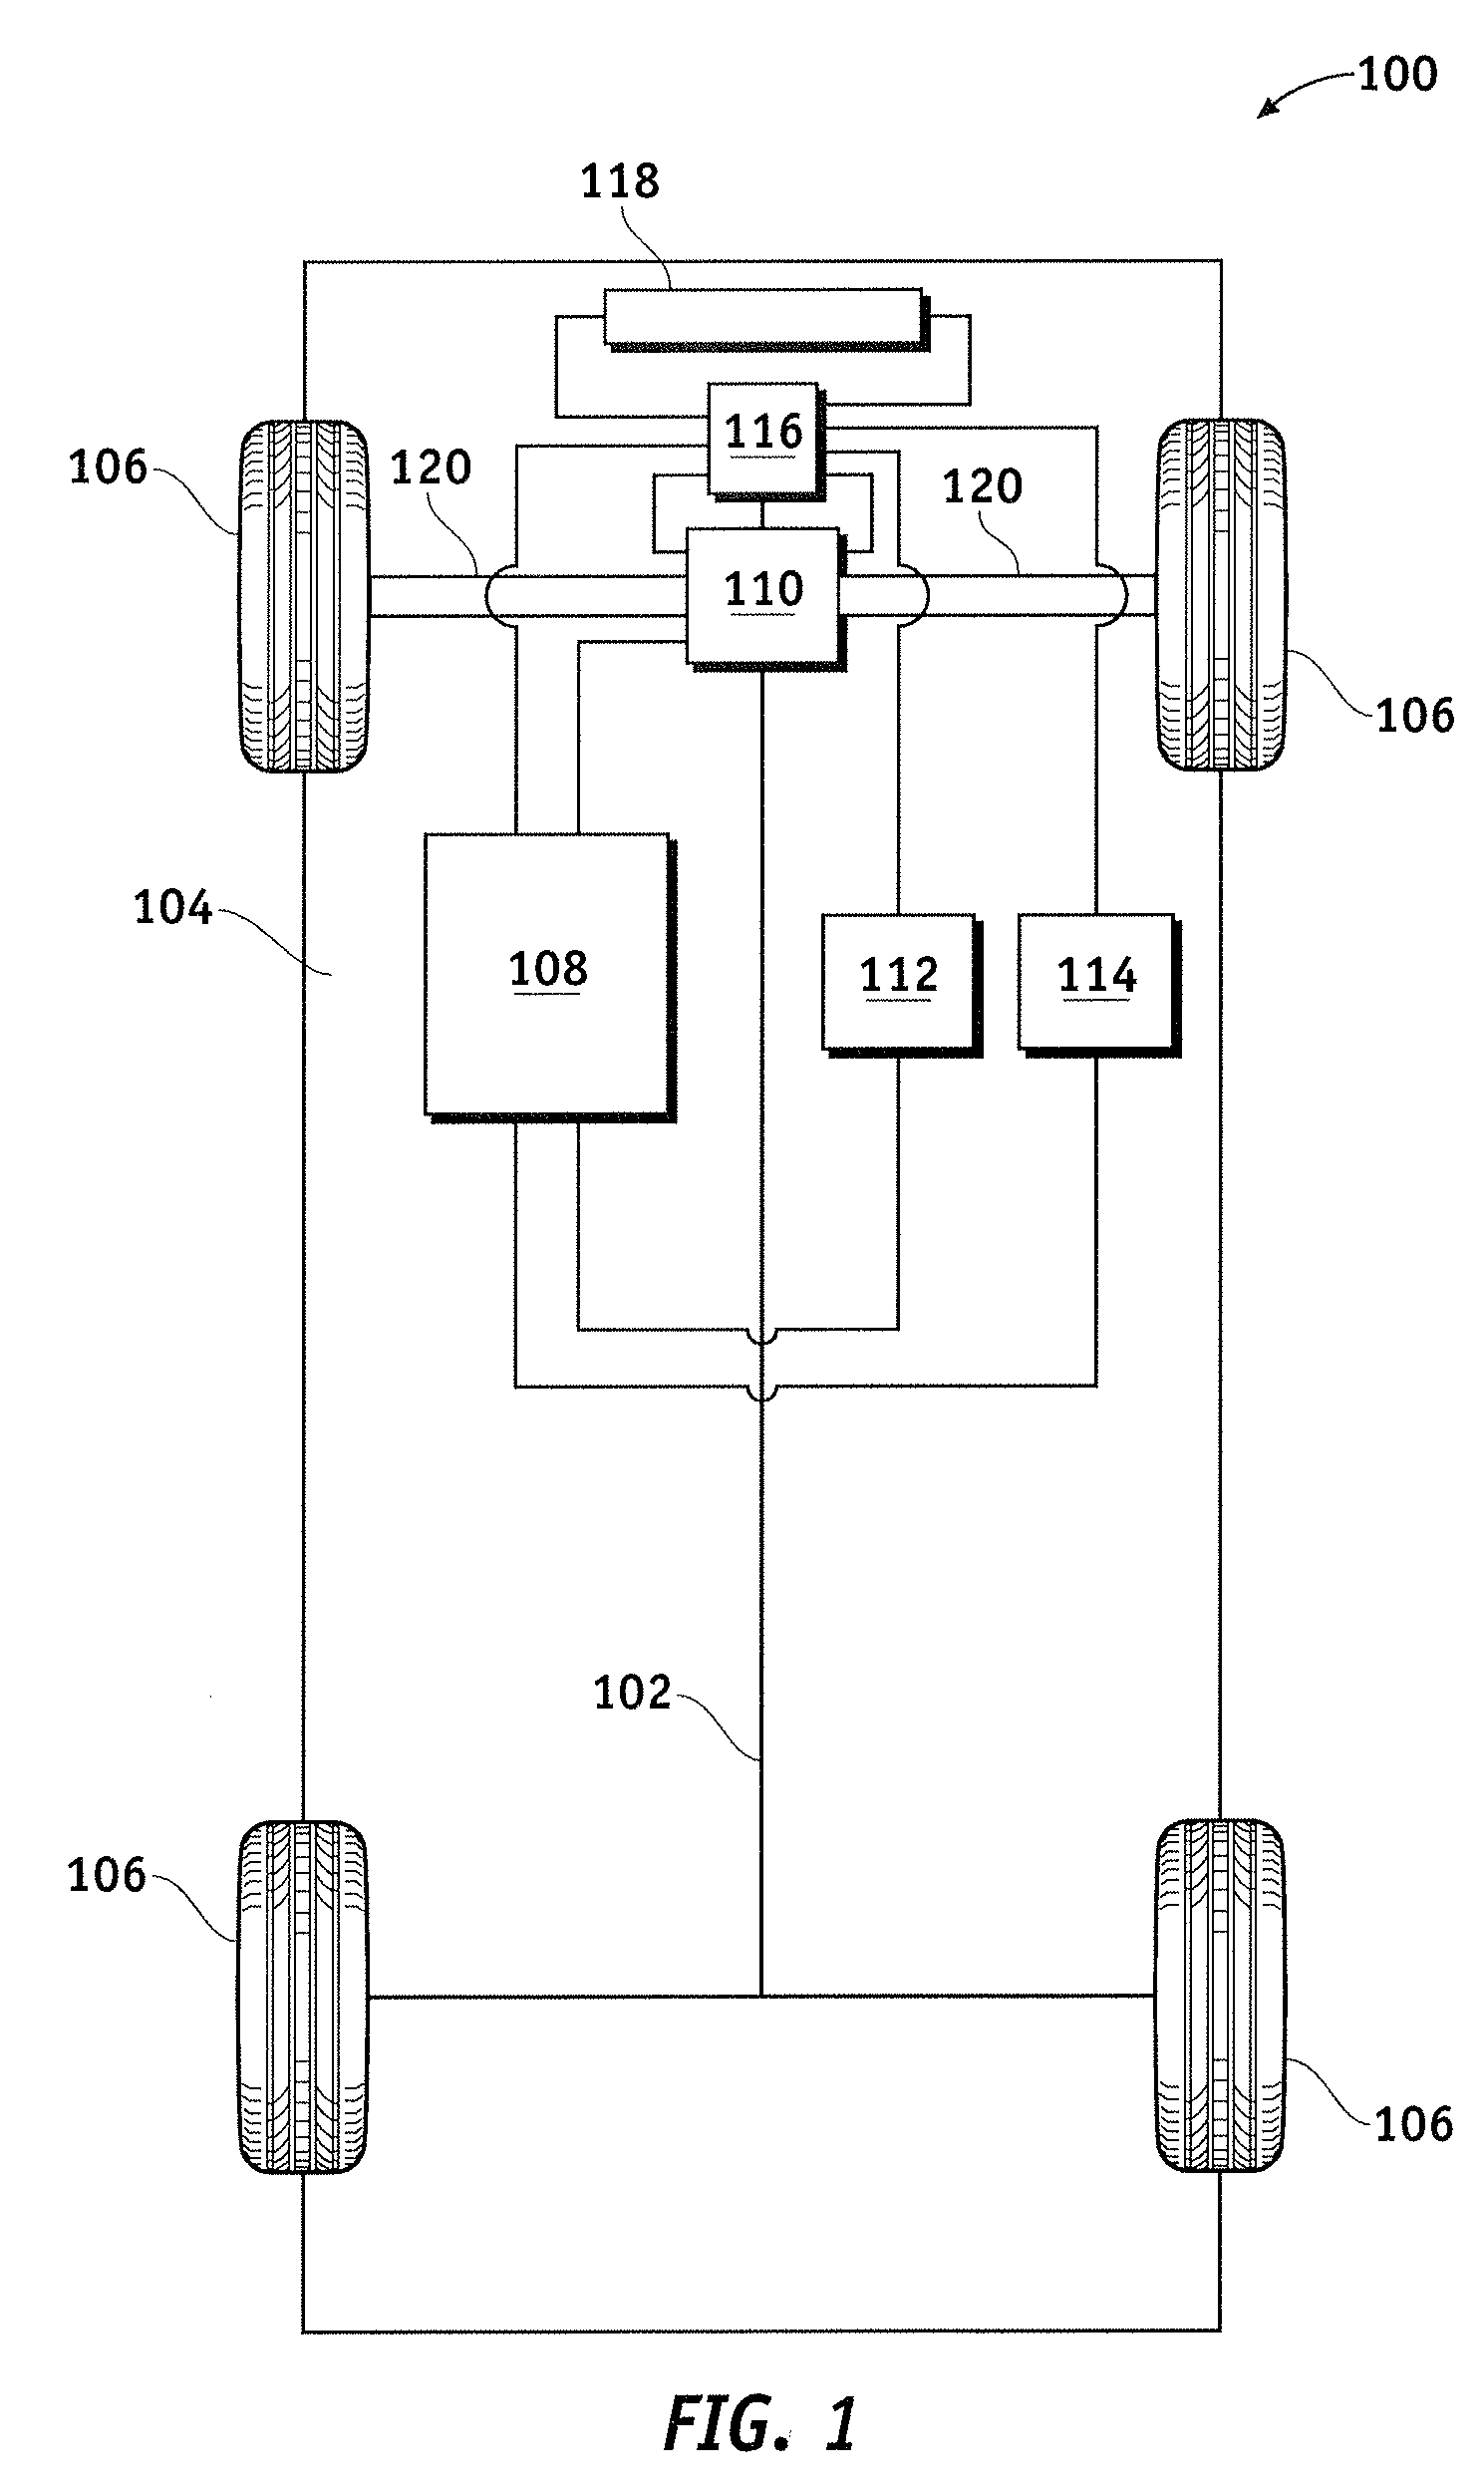 Double ended inverter system with a cross-linked ultracapacitor network